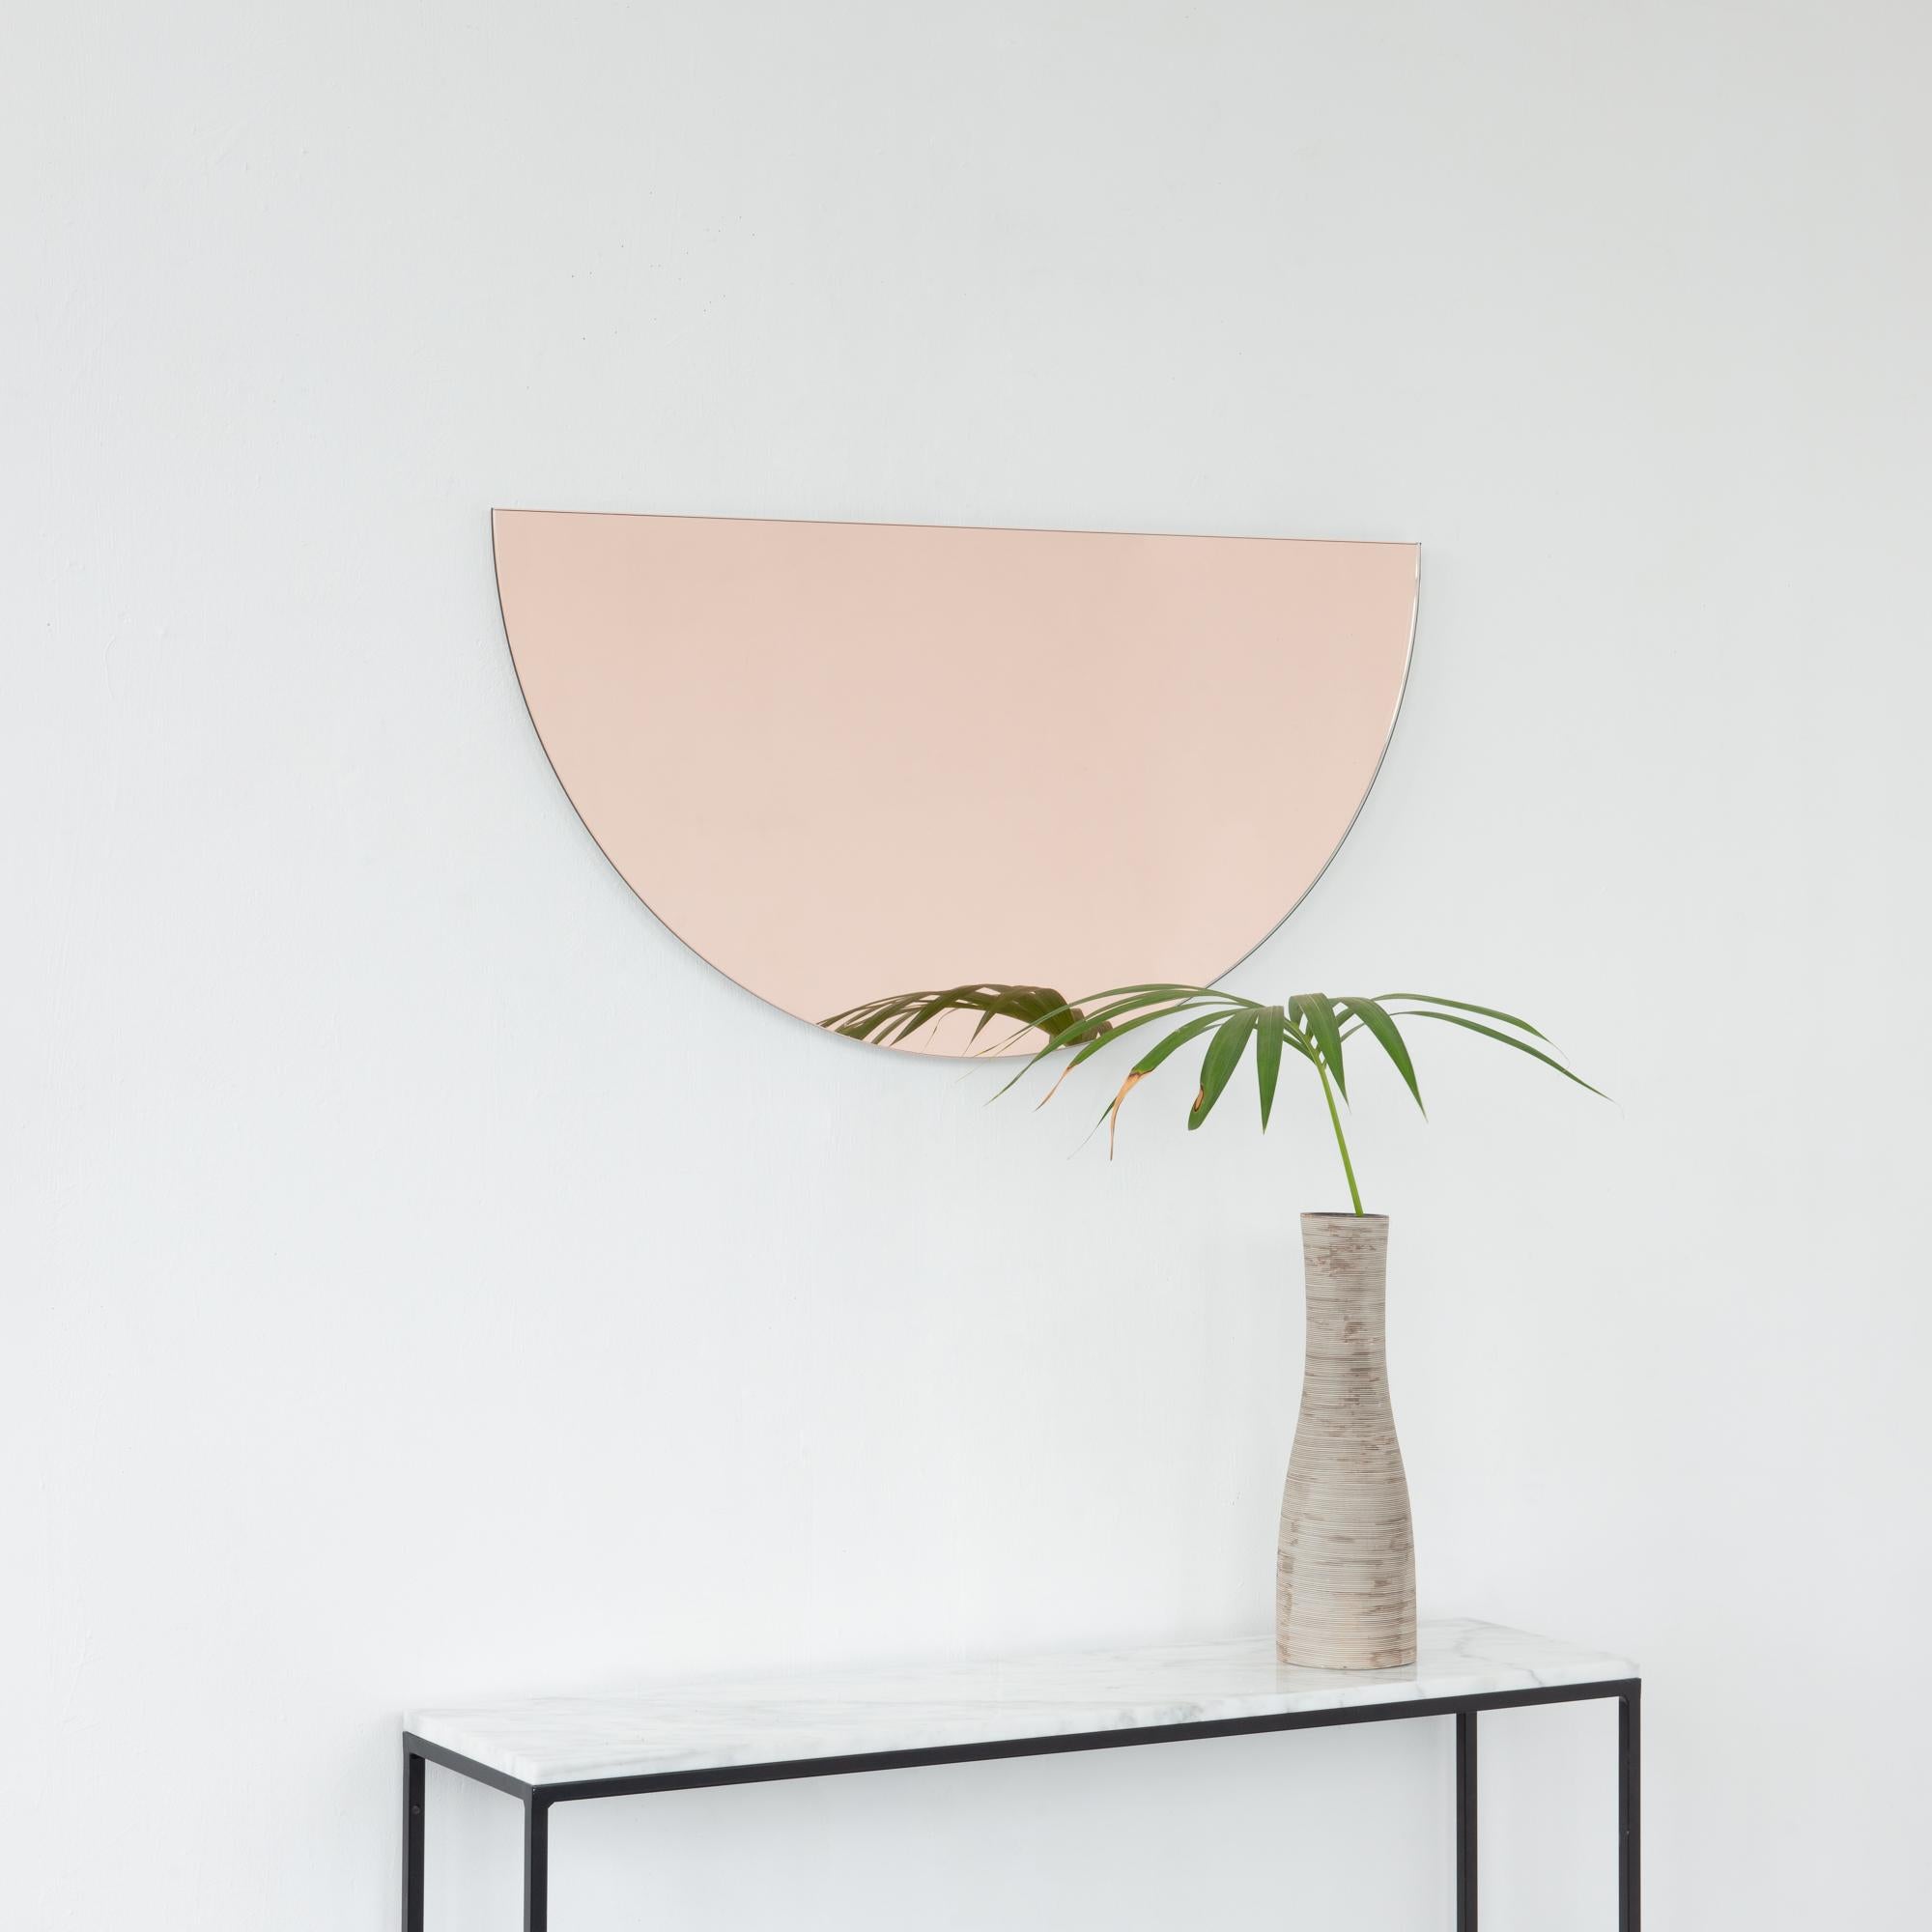 Luna Half-Moon Rose Gold Peach Tinted Minimalist Frameless Mirror, Regular In New Condition For Sale In London, GB